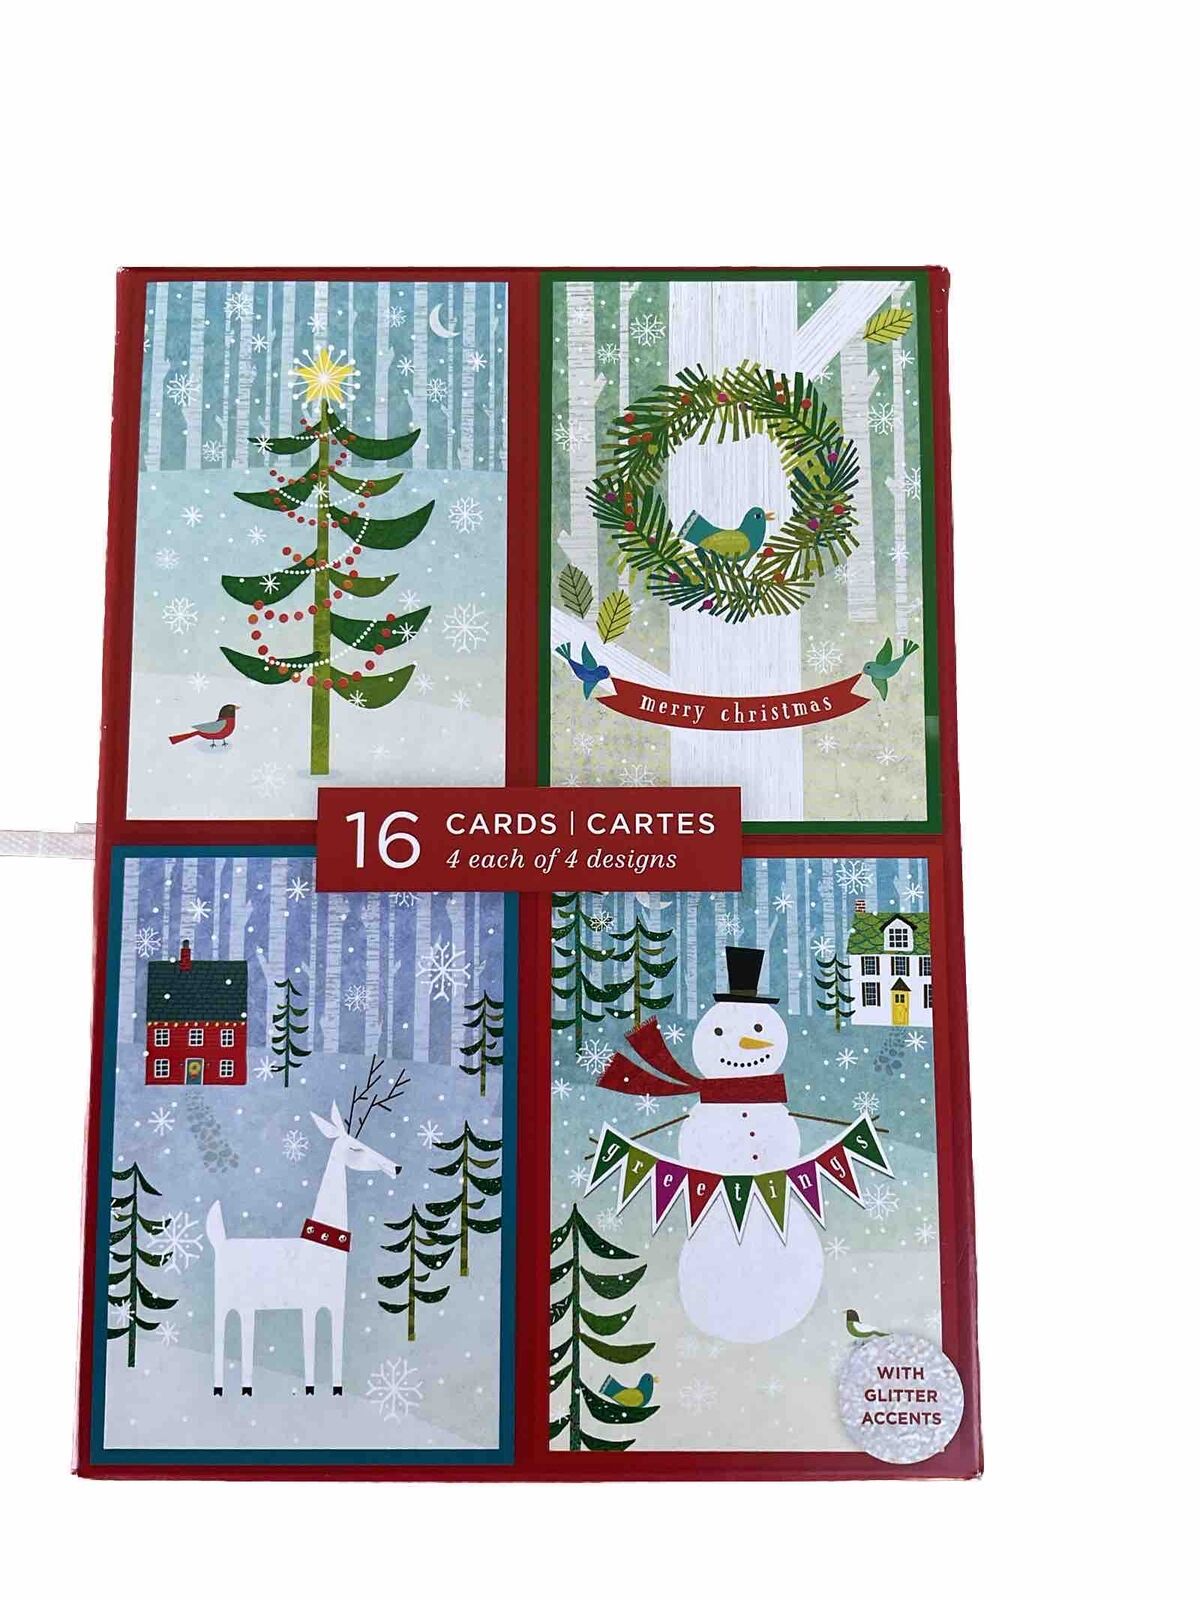 Image Arts Christmas Cards Box Of 16 Cards, 4 Each Of 4 Designs, Winter Theme